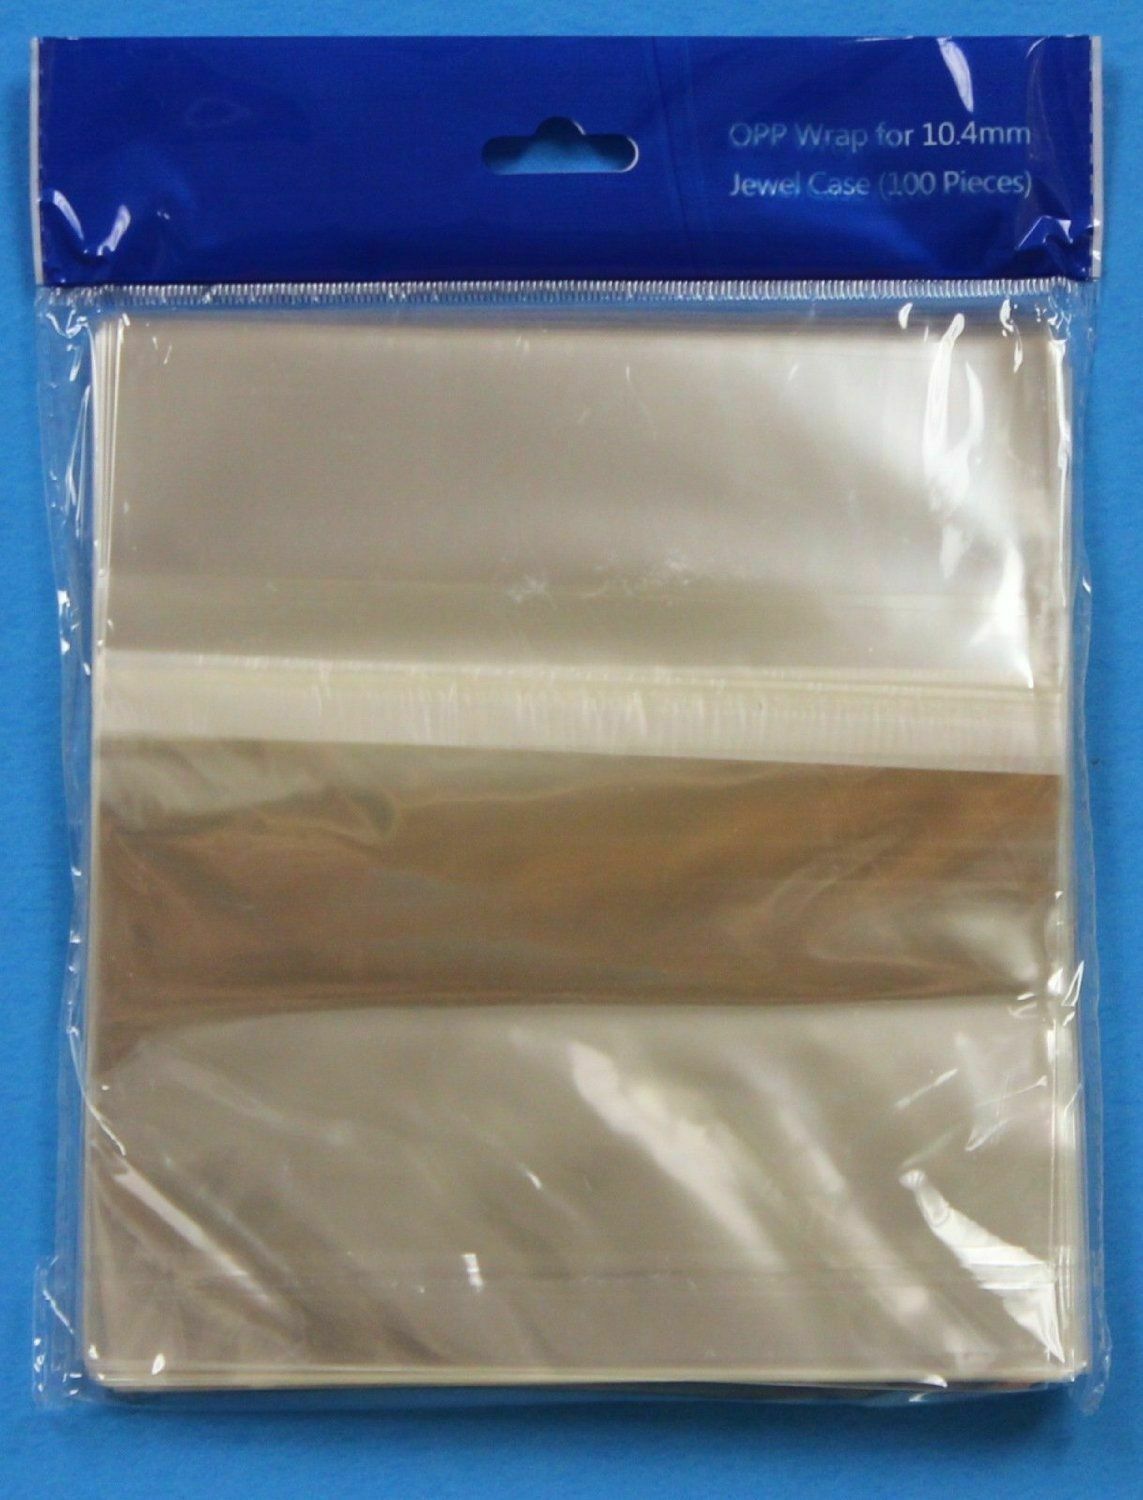 OPP Resealable Bags for 10.4mm CD Jewel Case 1000pk